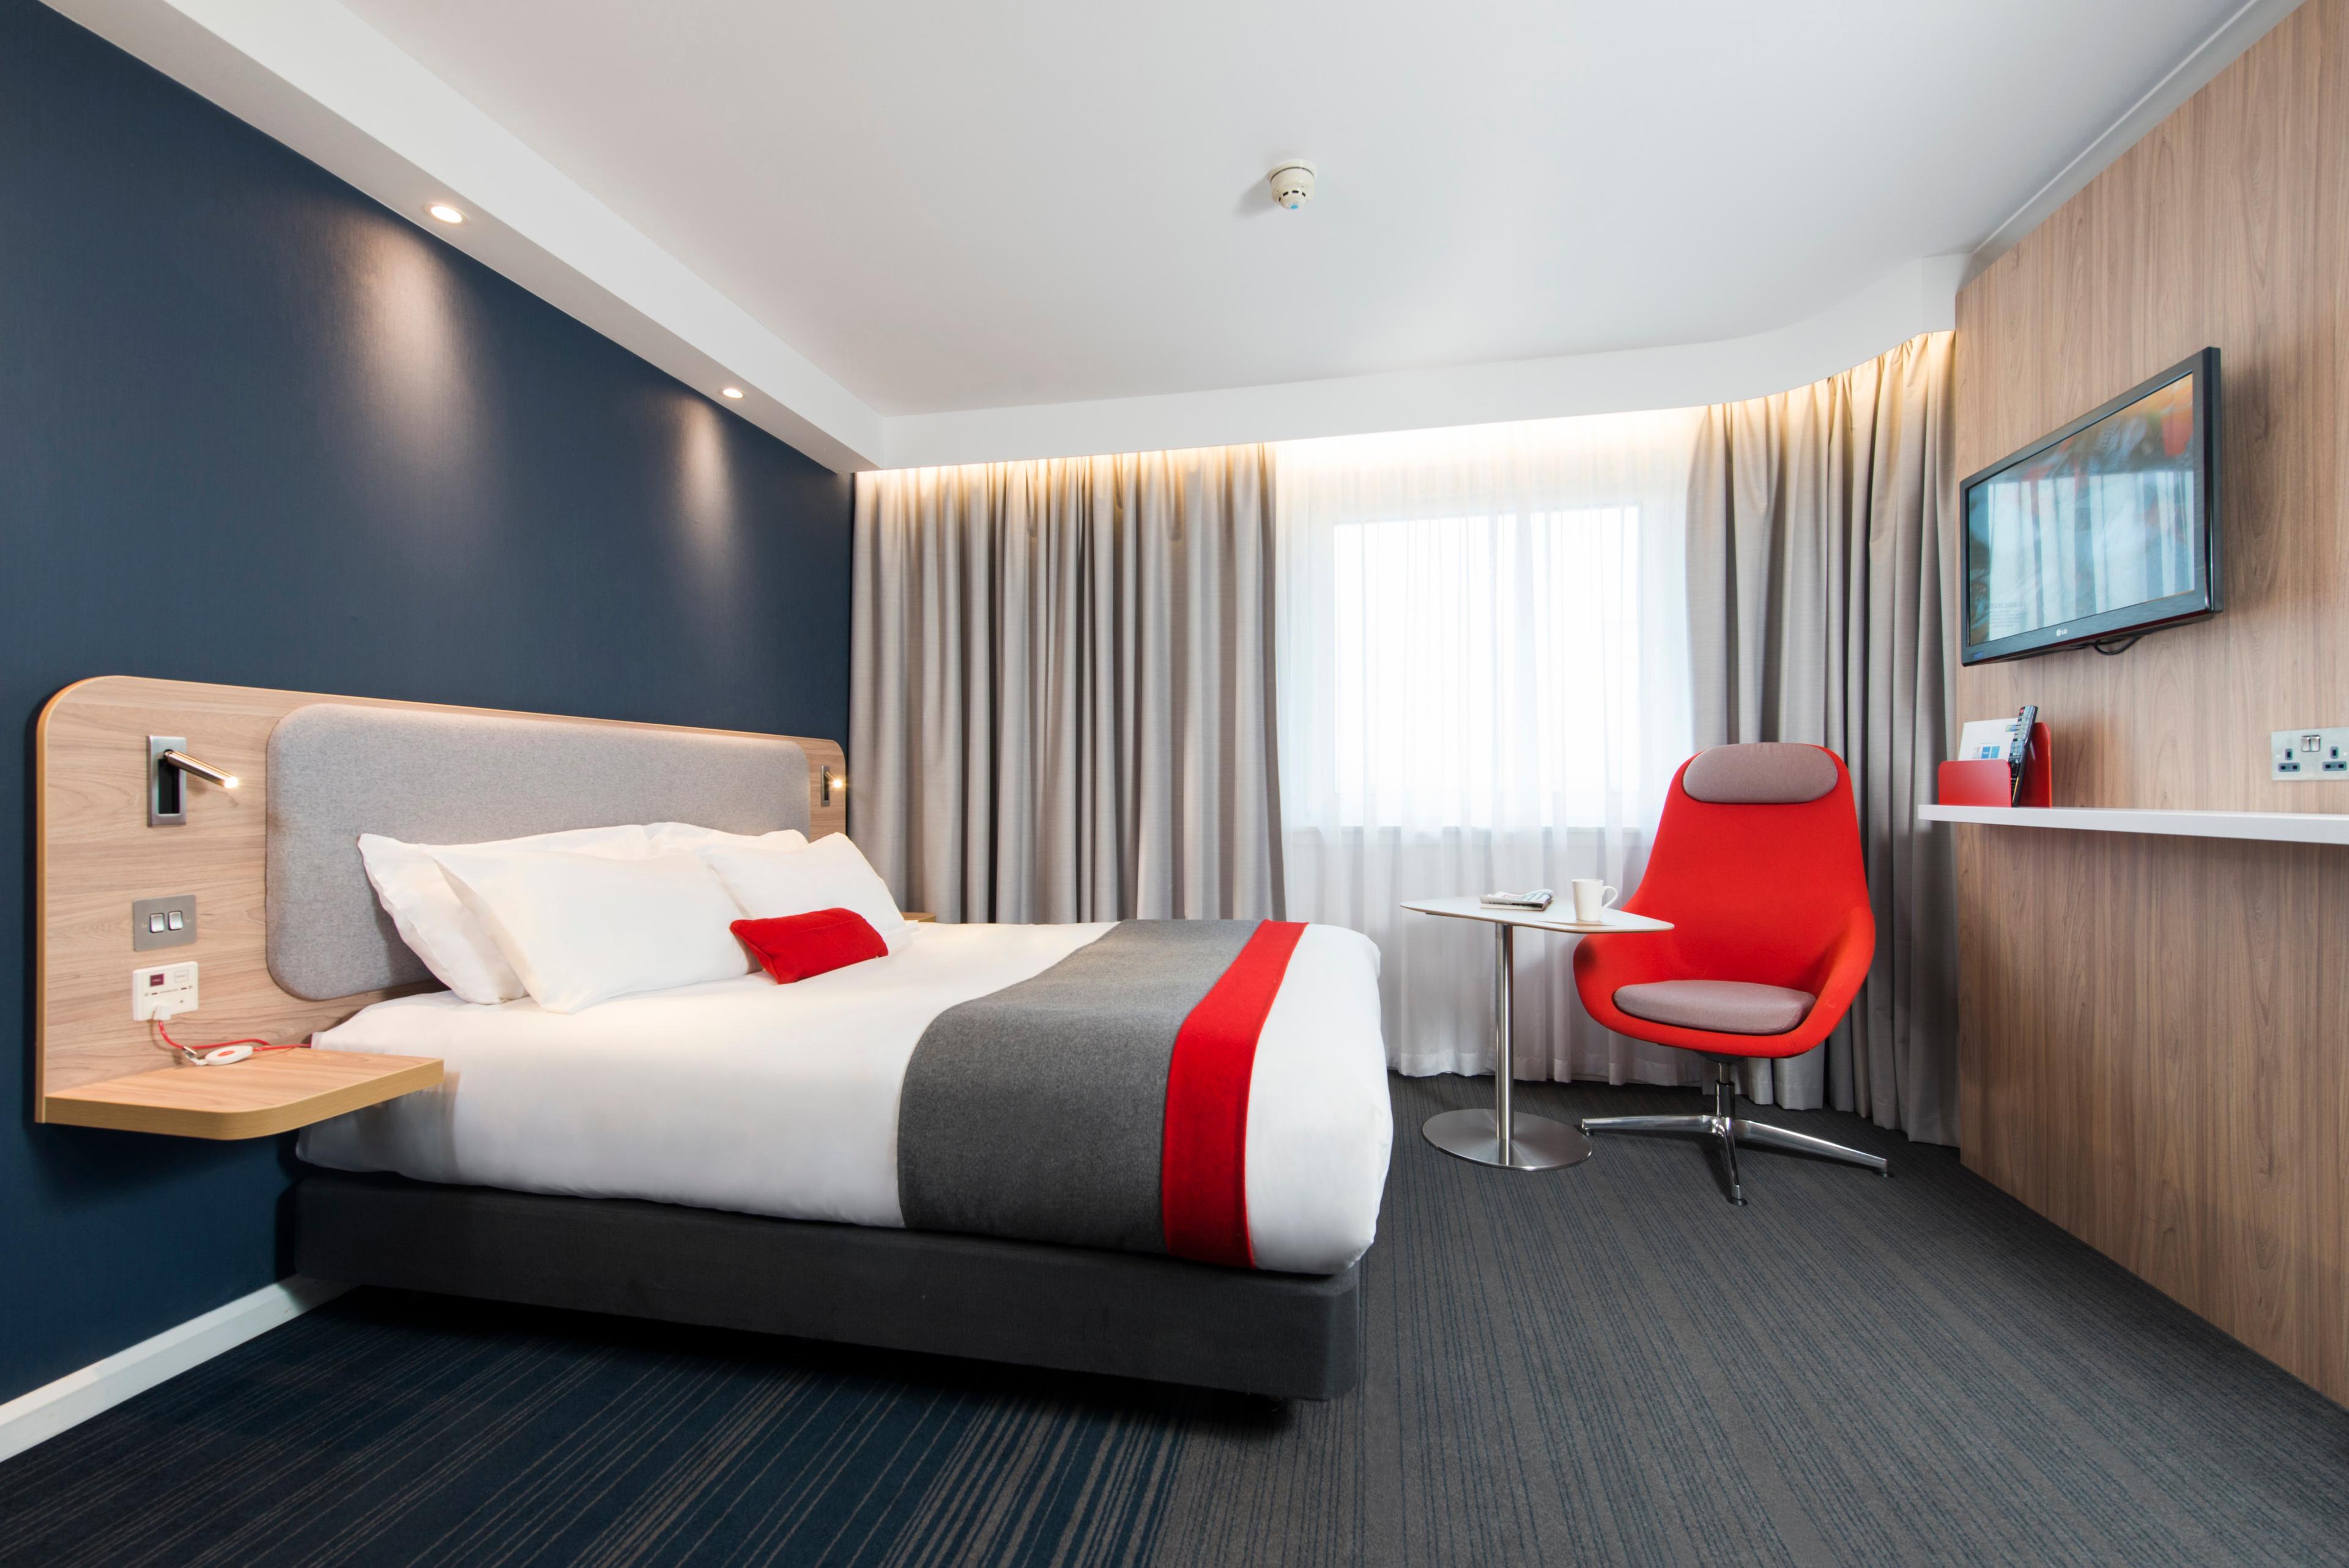 Our accessible rooms are spacious and practical